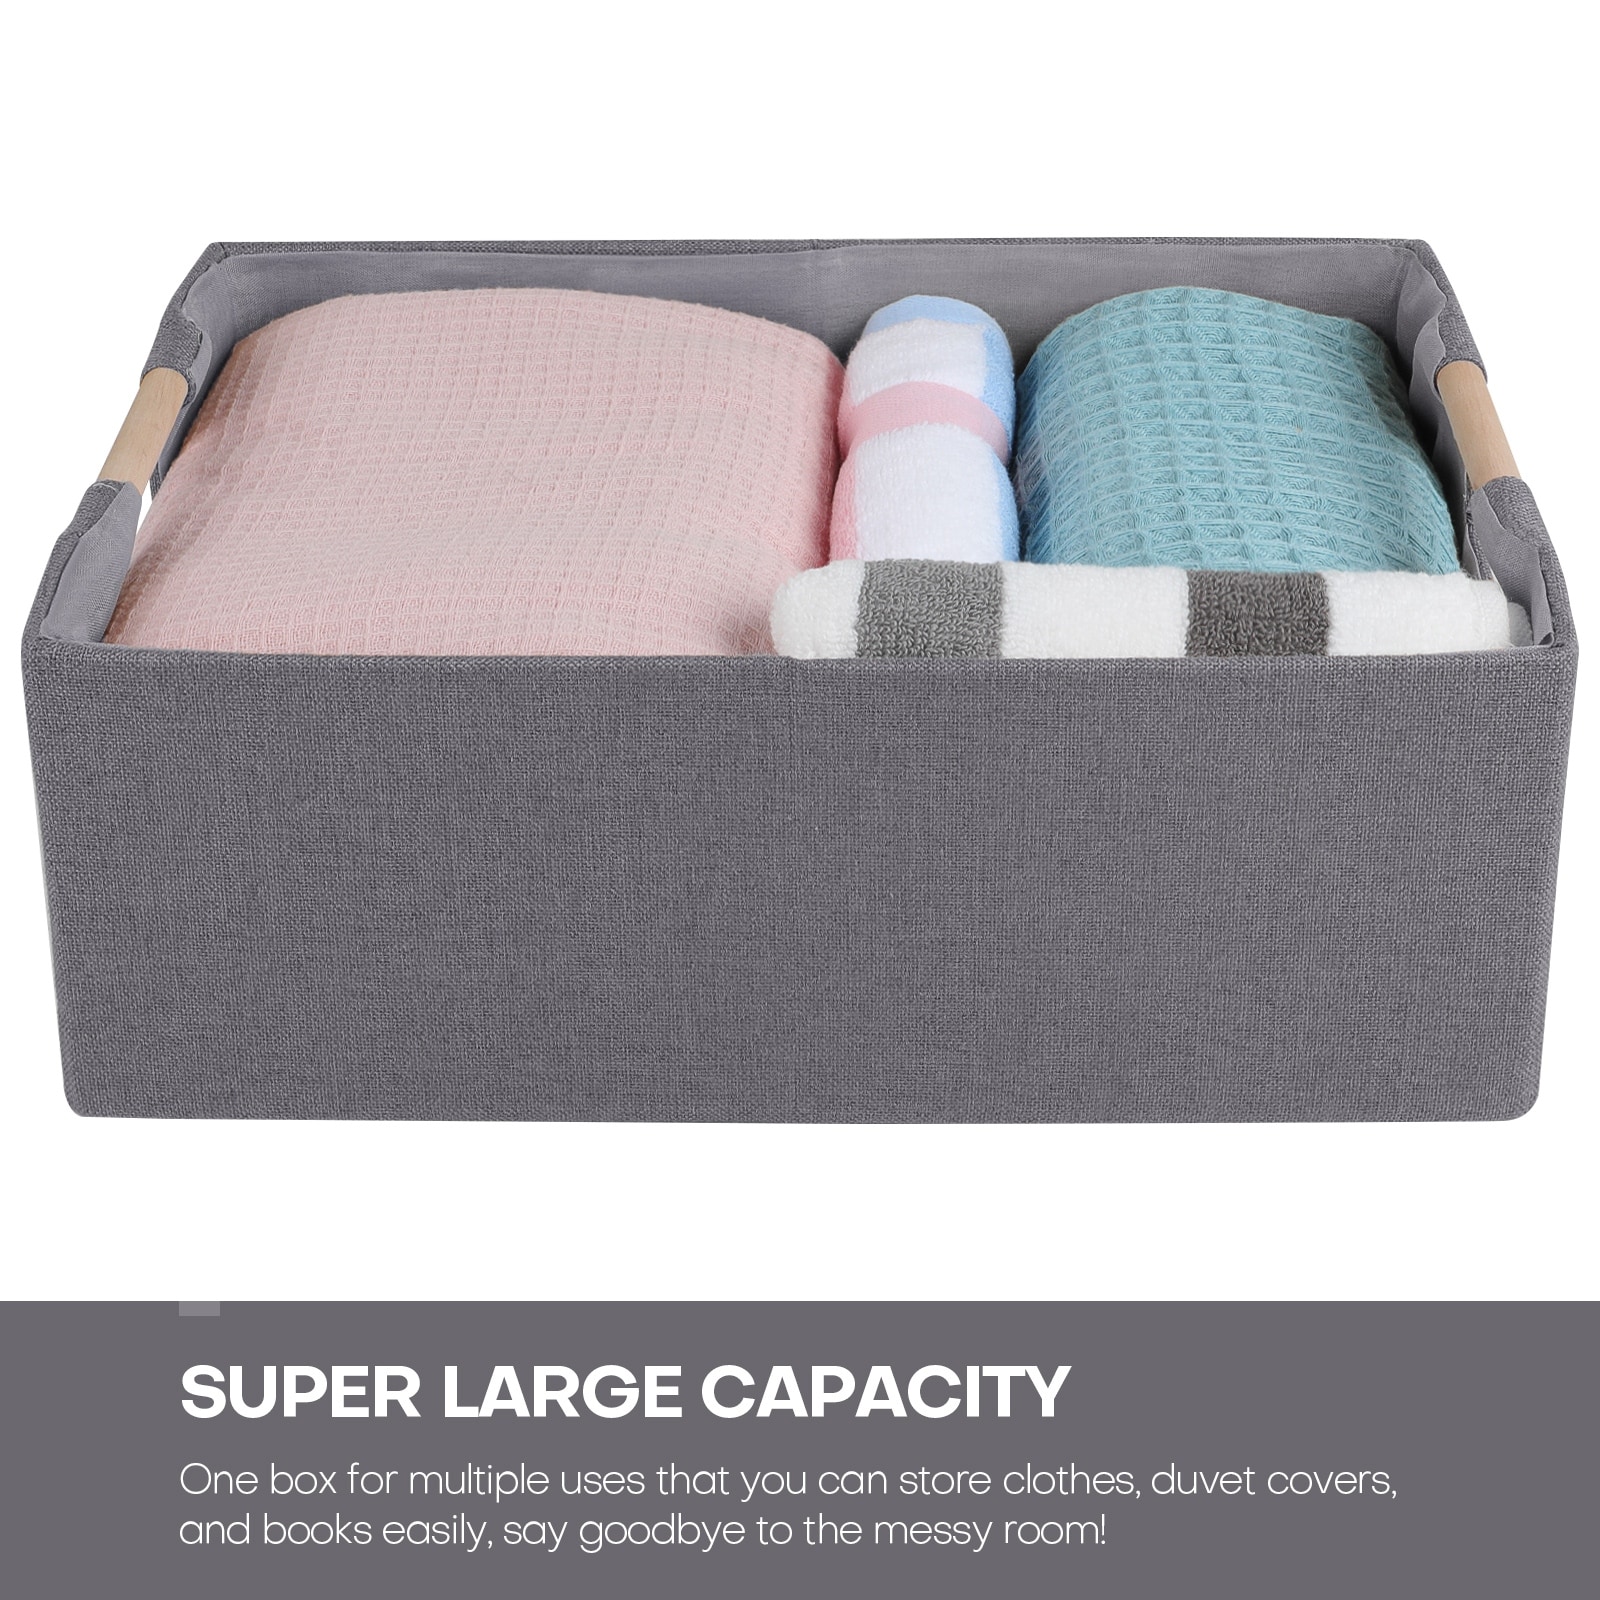 https://ak1.ostkcdn.com/images/products/is/images/direct/2f2c05d37926831abb30aace3328a663fb0072da/Fabric-Foldable-Storage-Bins-Organizer-Container-W-Wood-Handles-2Pcs.jpg